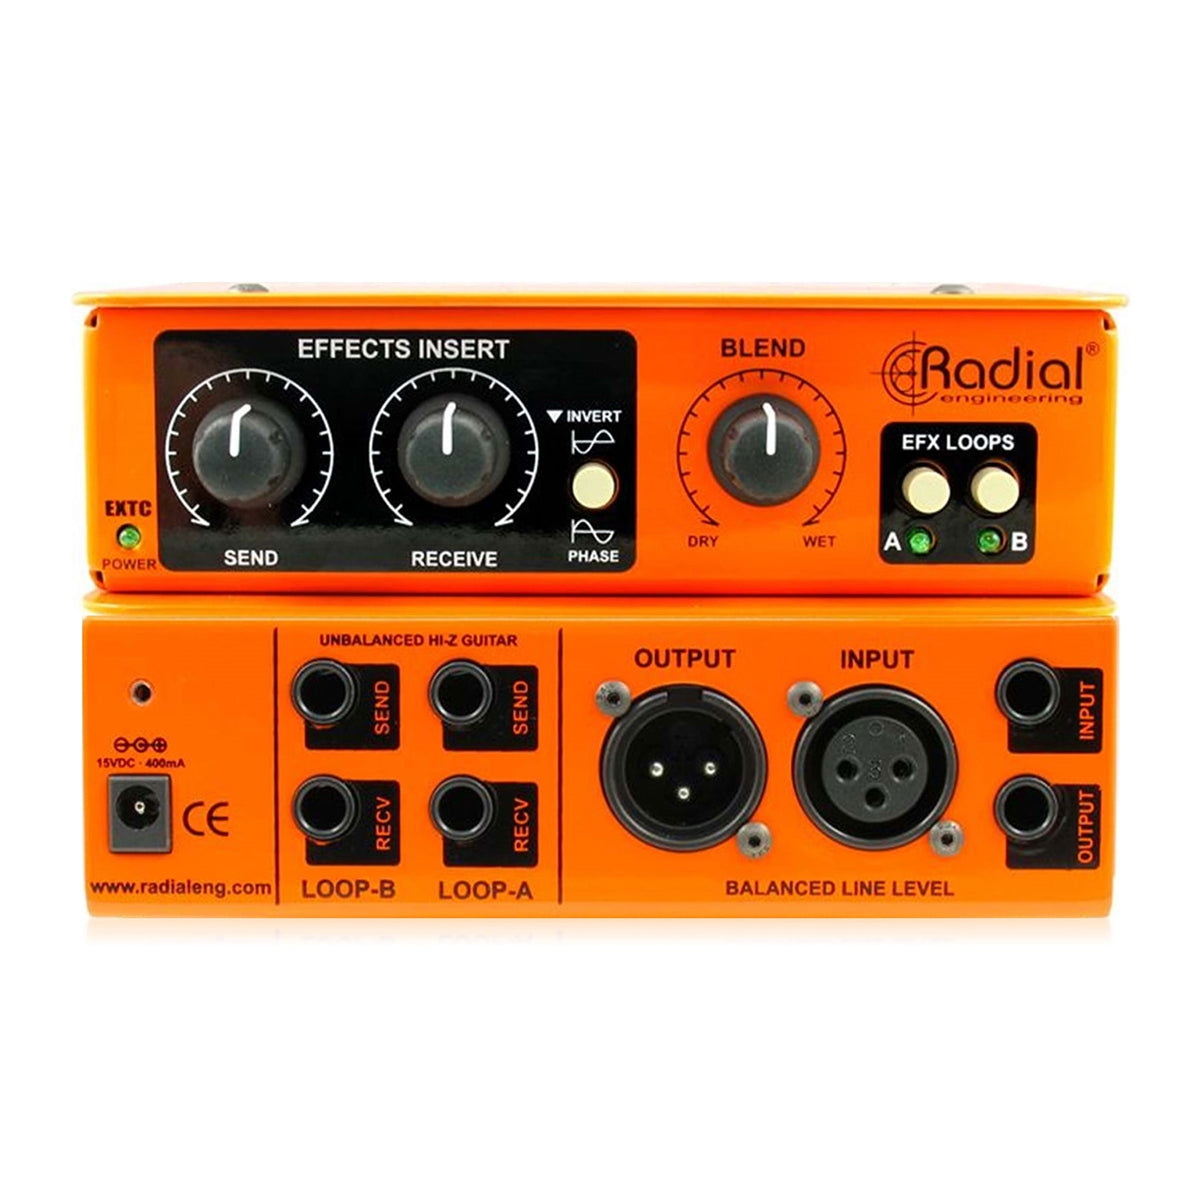 Radial EXTC-SA Guitar pedal send & receive interface for recording systems